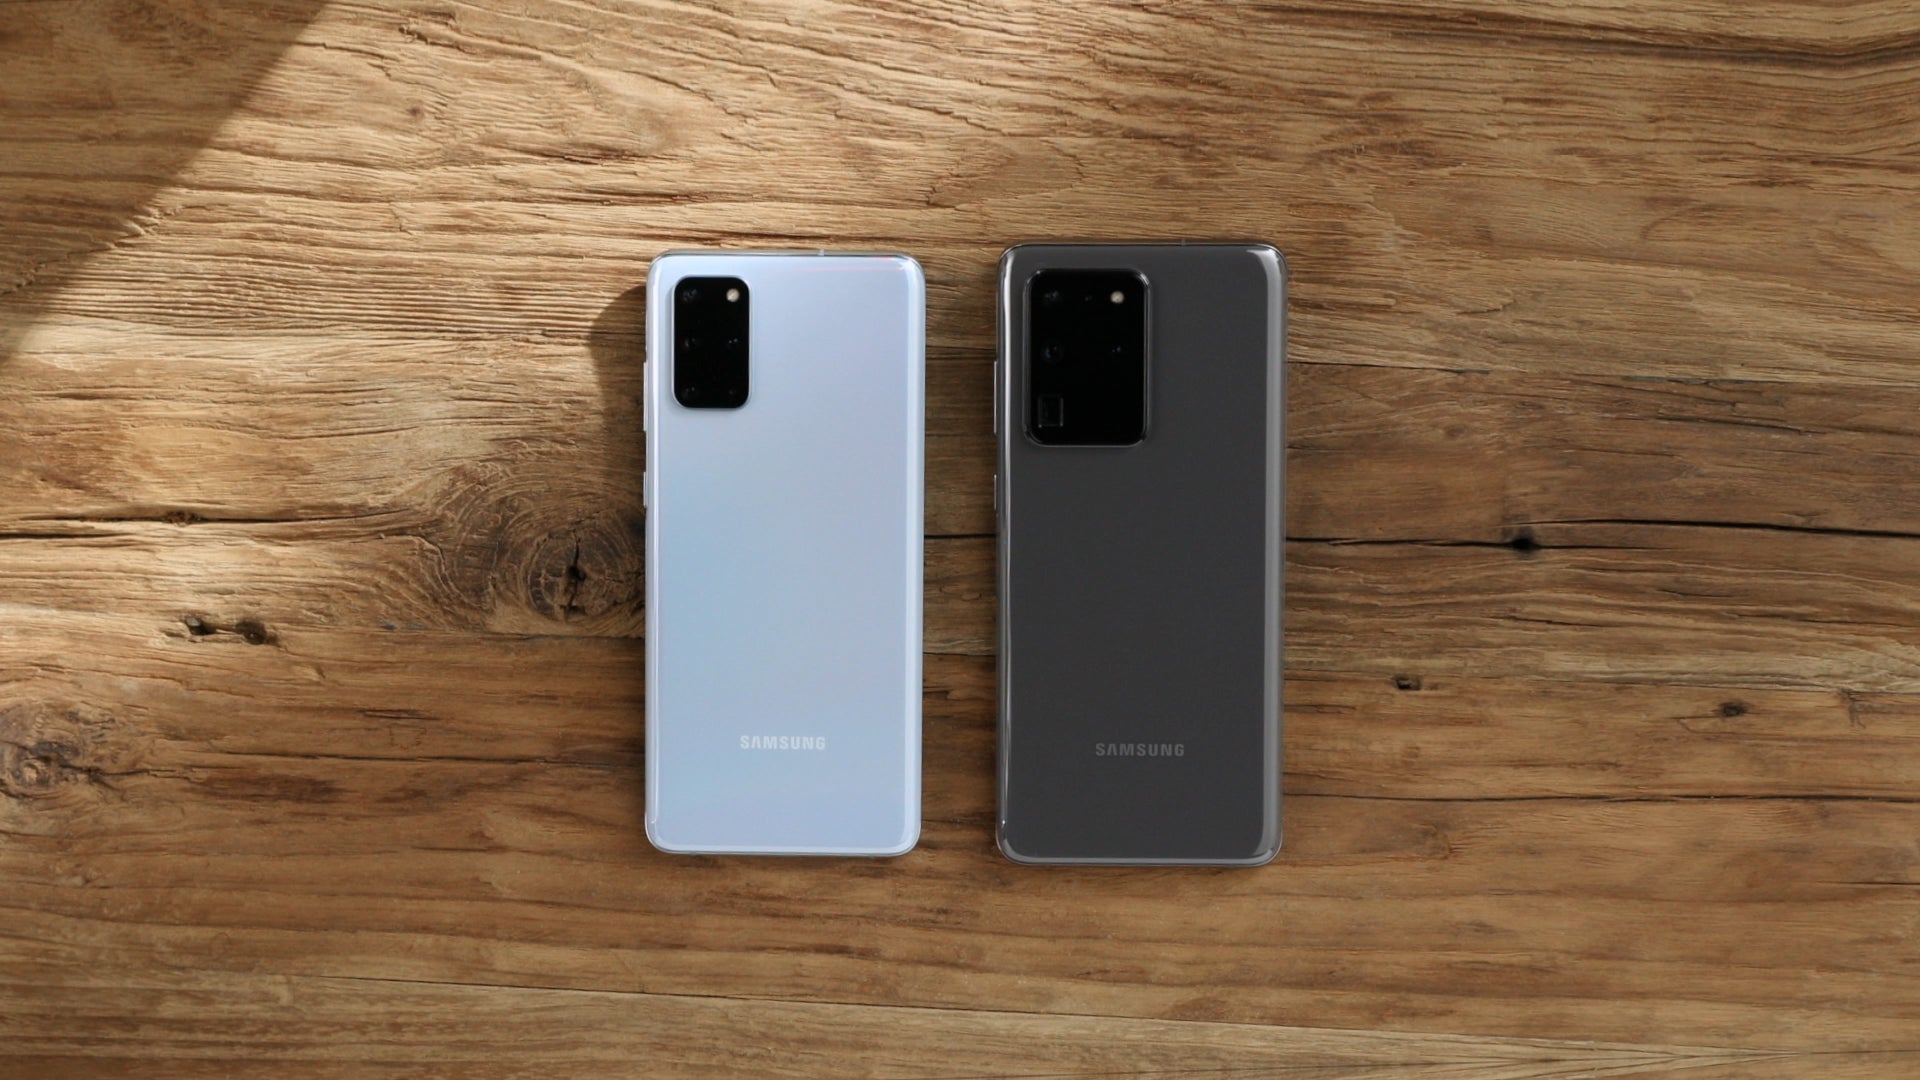 The Samsung Galaxy S20+ compared to the S20 Ultra. - The Galaxy S20 series of flagships becomes extremely affordable thanks to these Black Friday deals!